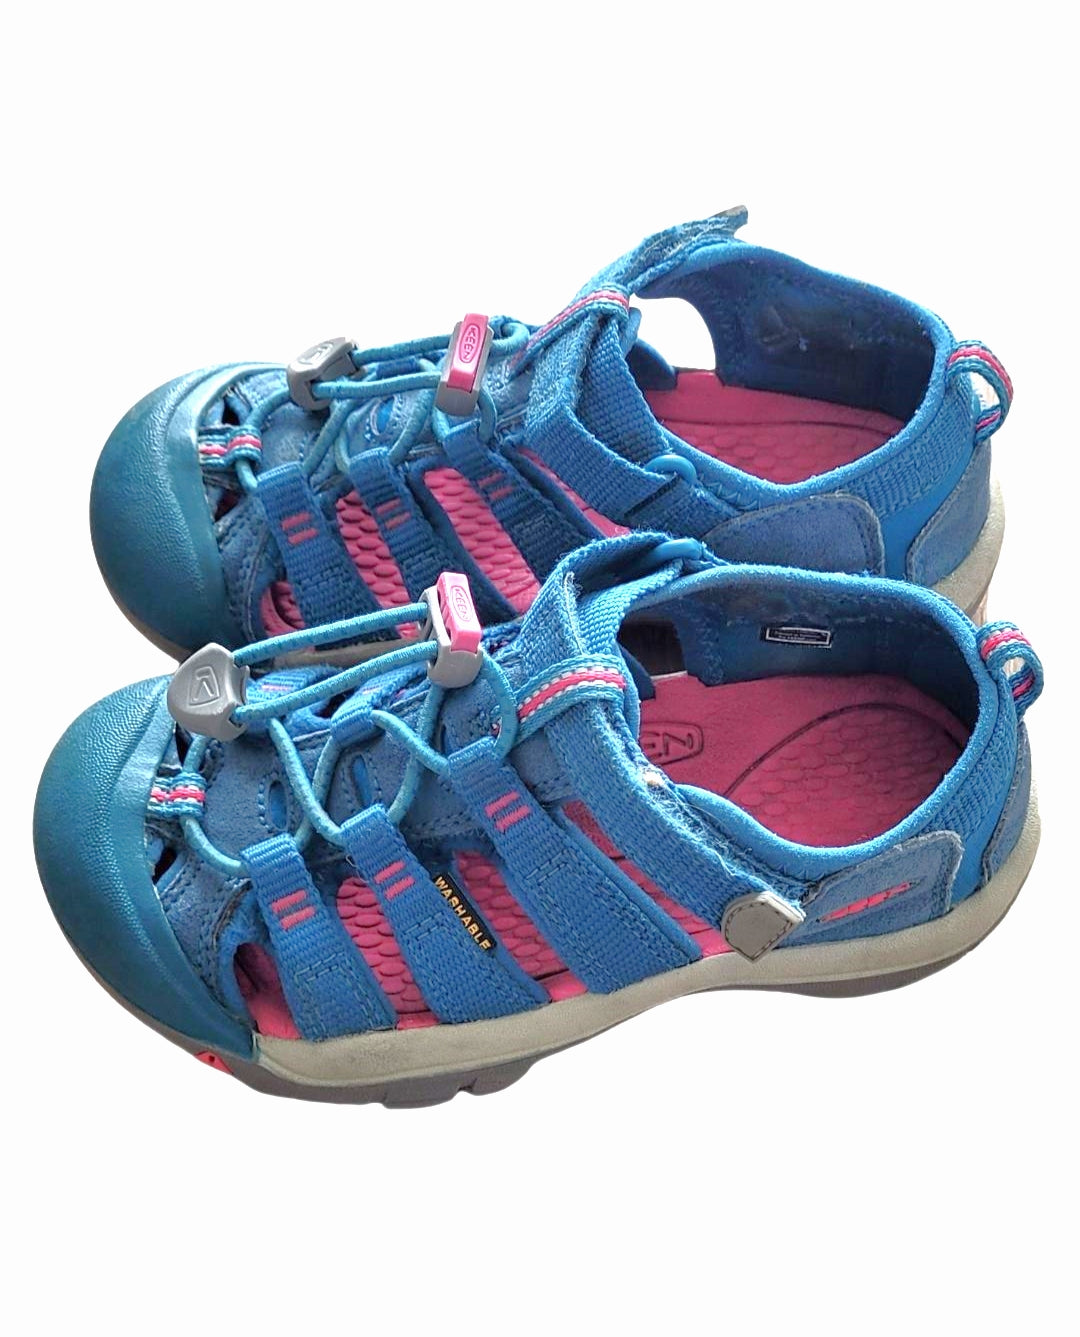 Used Kids Newport Water Sandals by KEEN Little Kids' Size 12-Blue and Pink